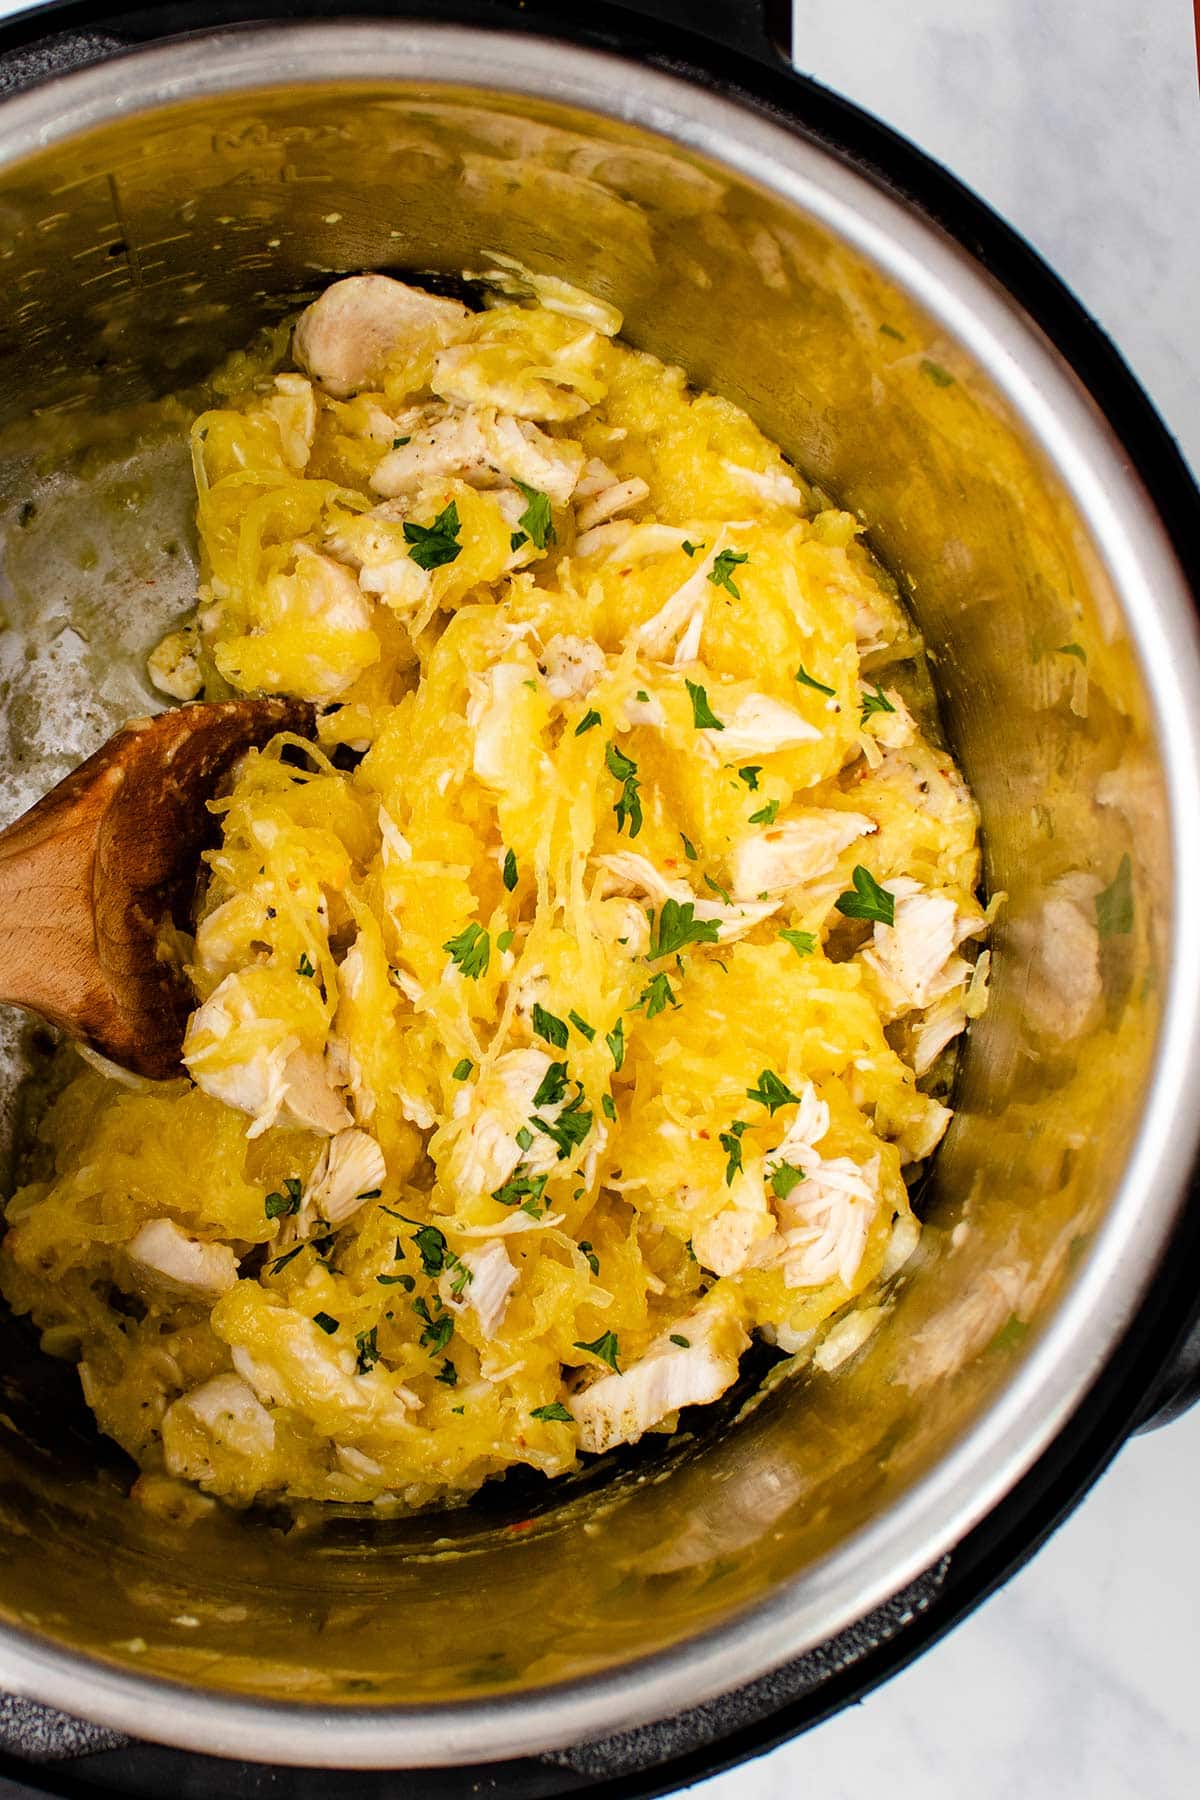 Spaghetti squash with chicken in an Instant Pot with a wooden spoon.